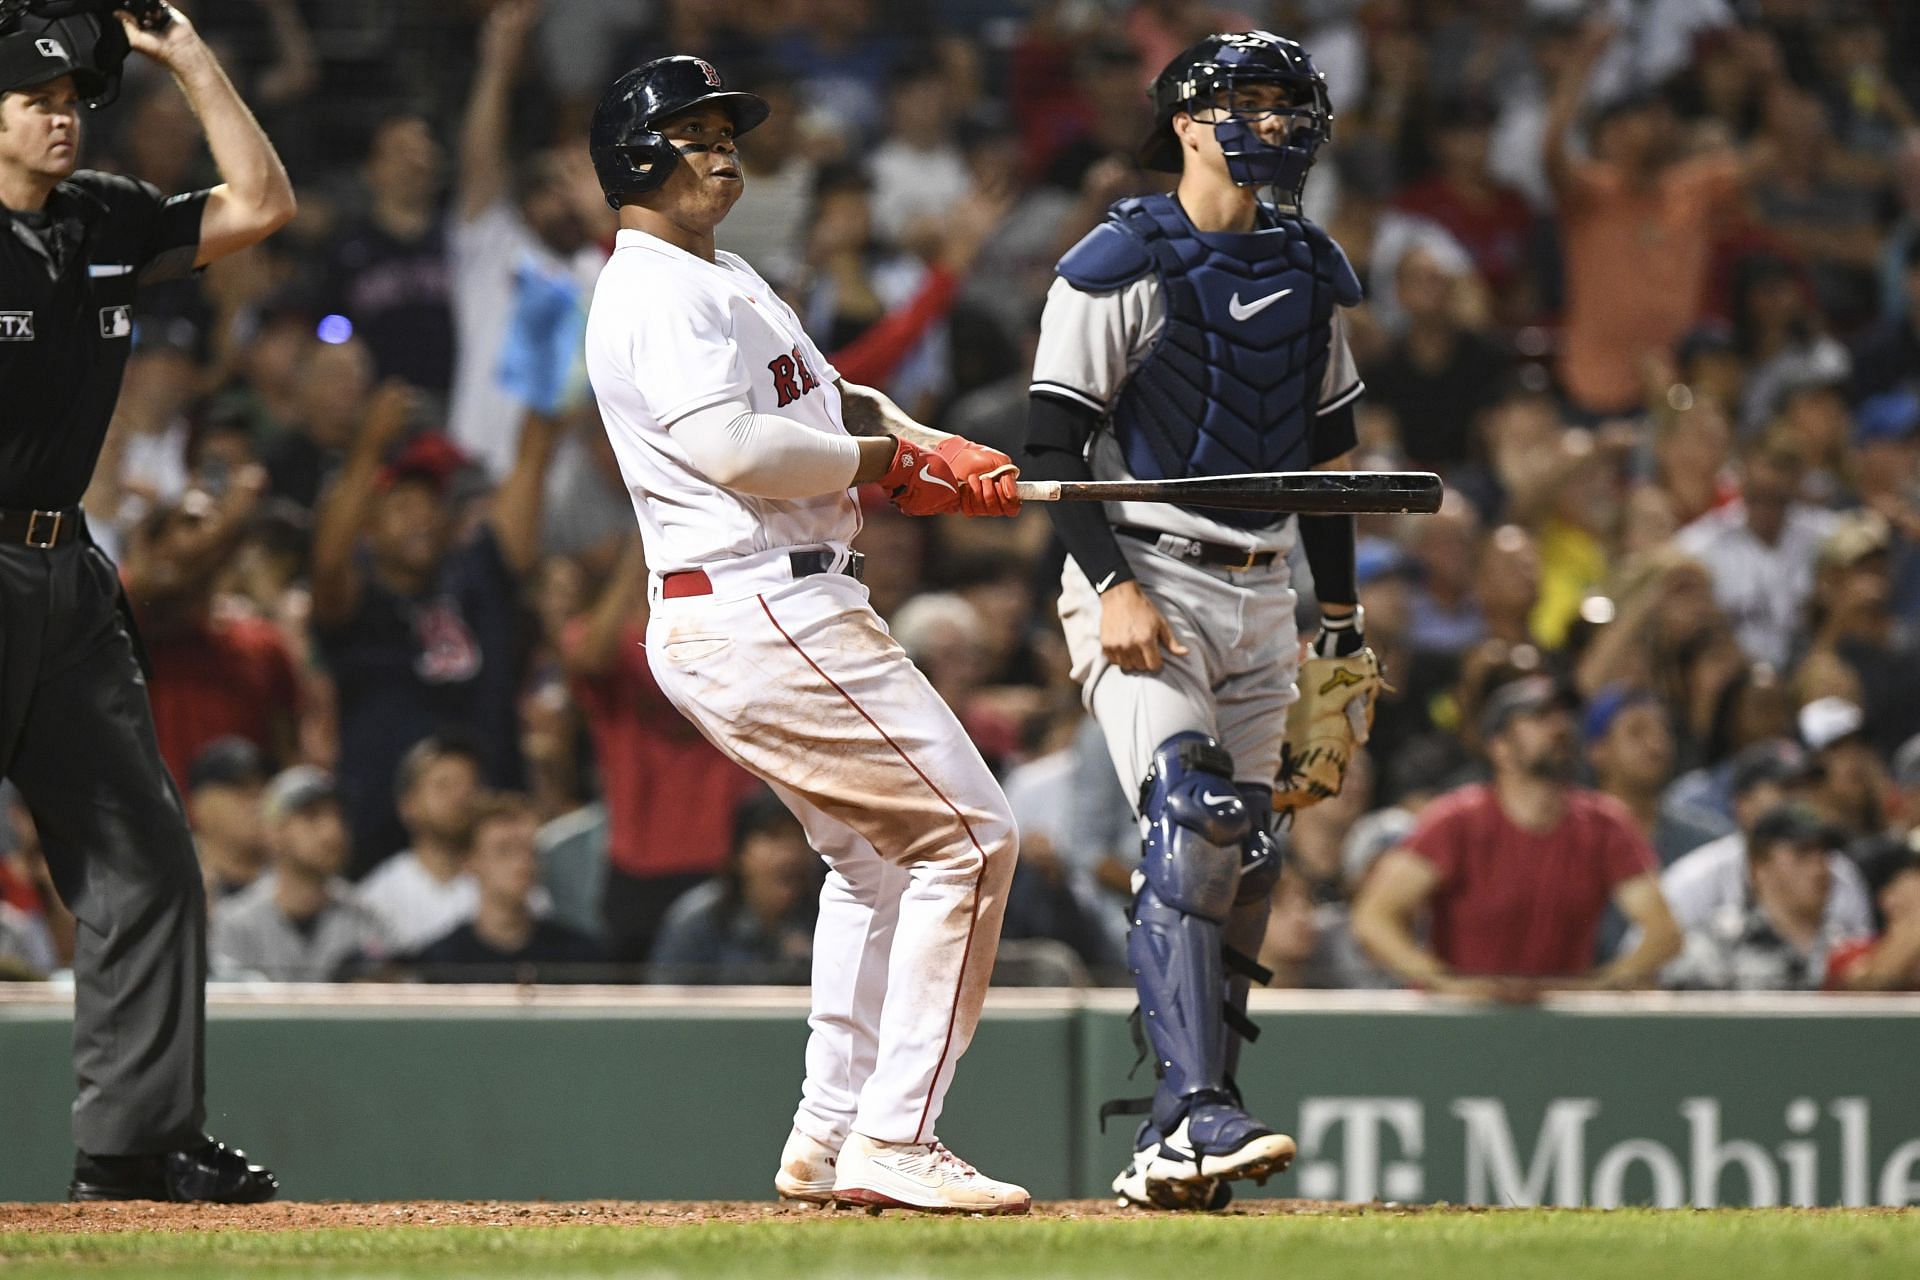 Red Sox, Rafael Devers agree to 11-year, $331 million contract extension